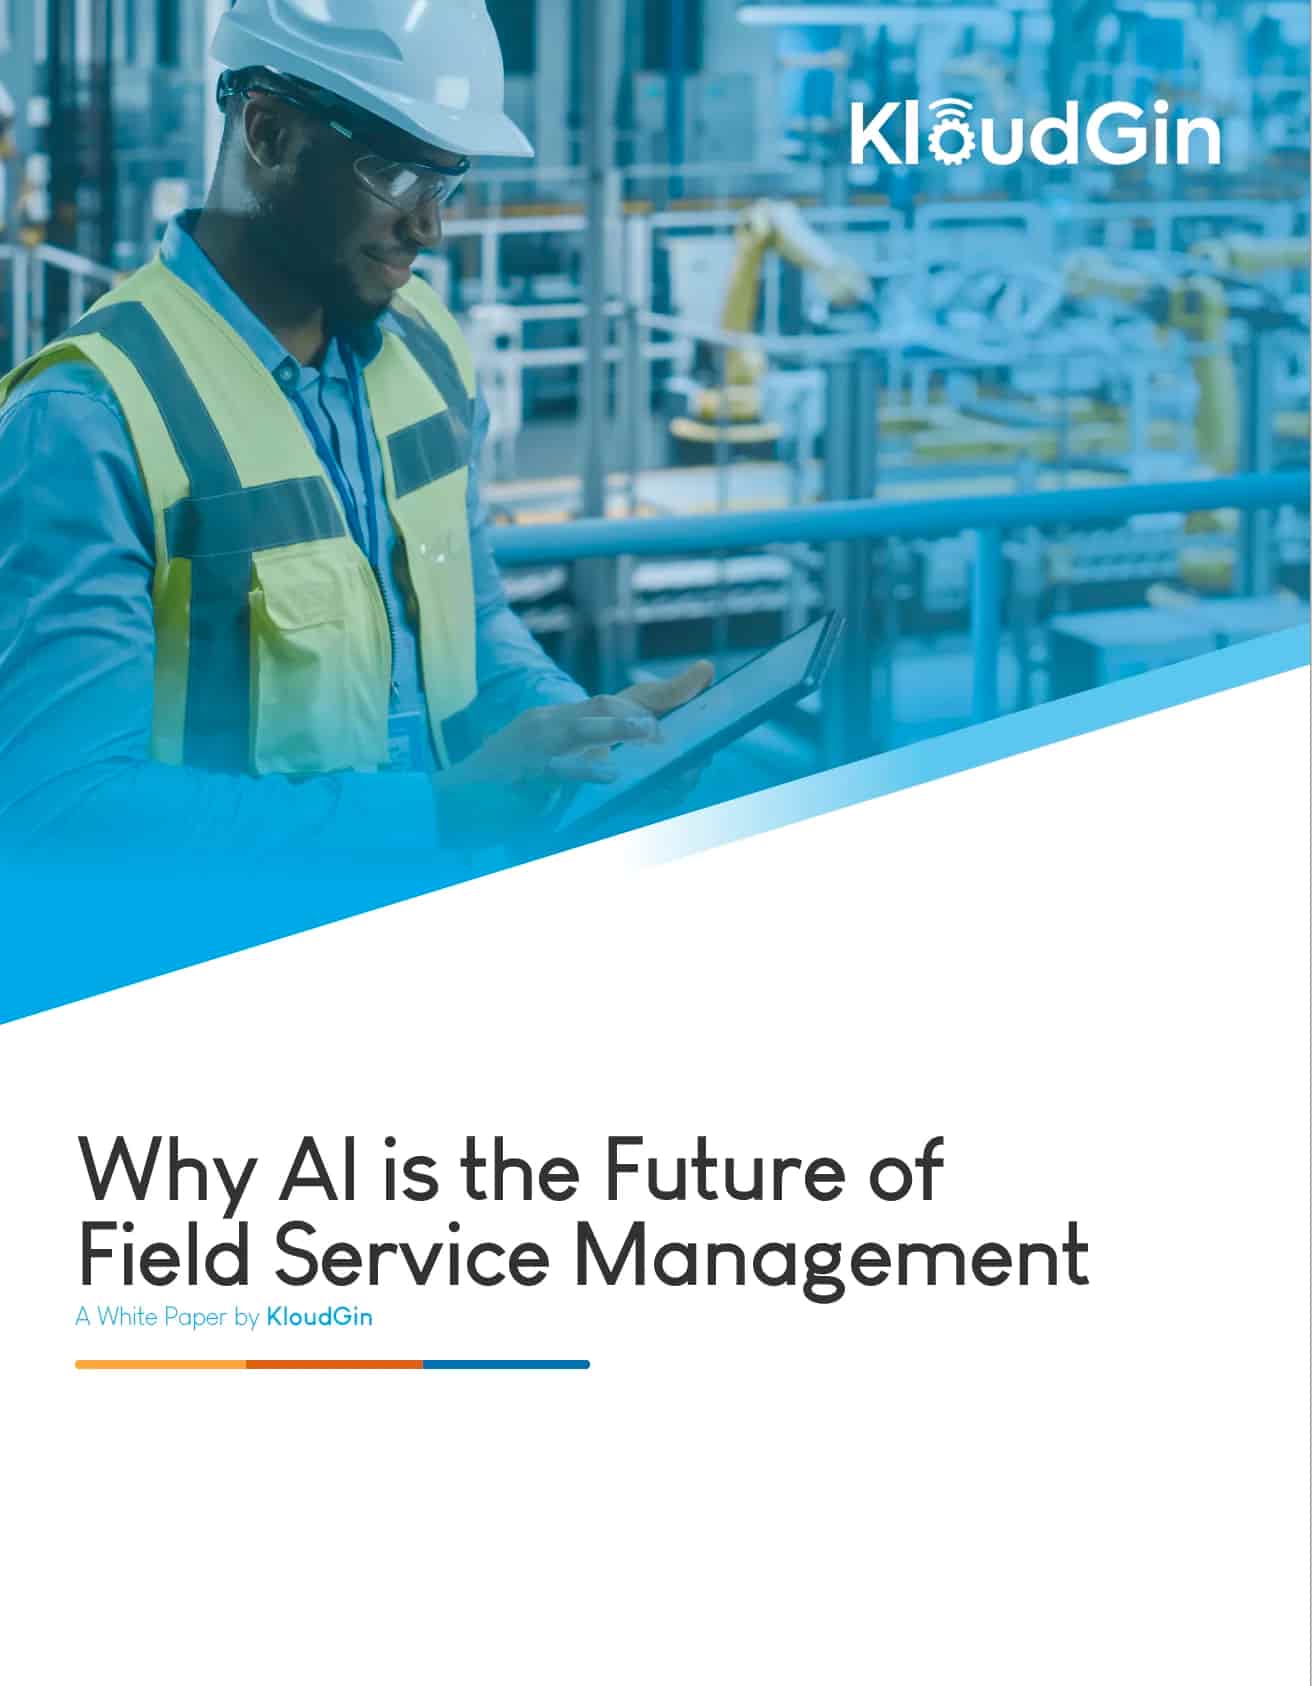 Why AI is the Future of Field Service Management